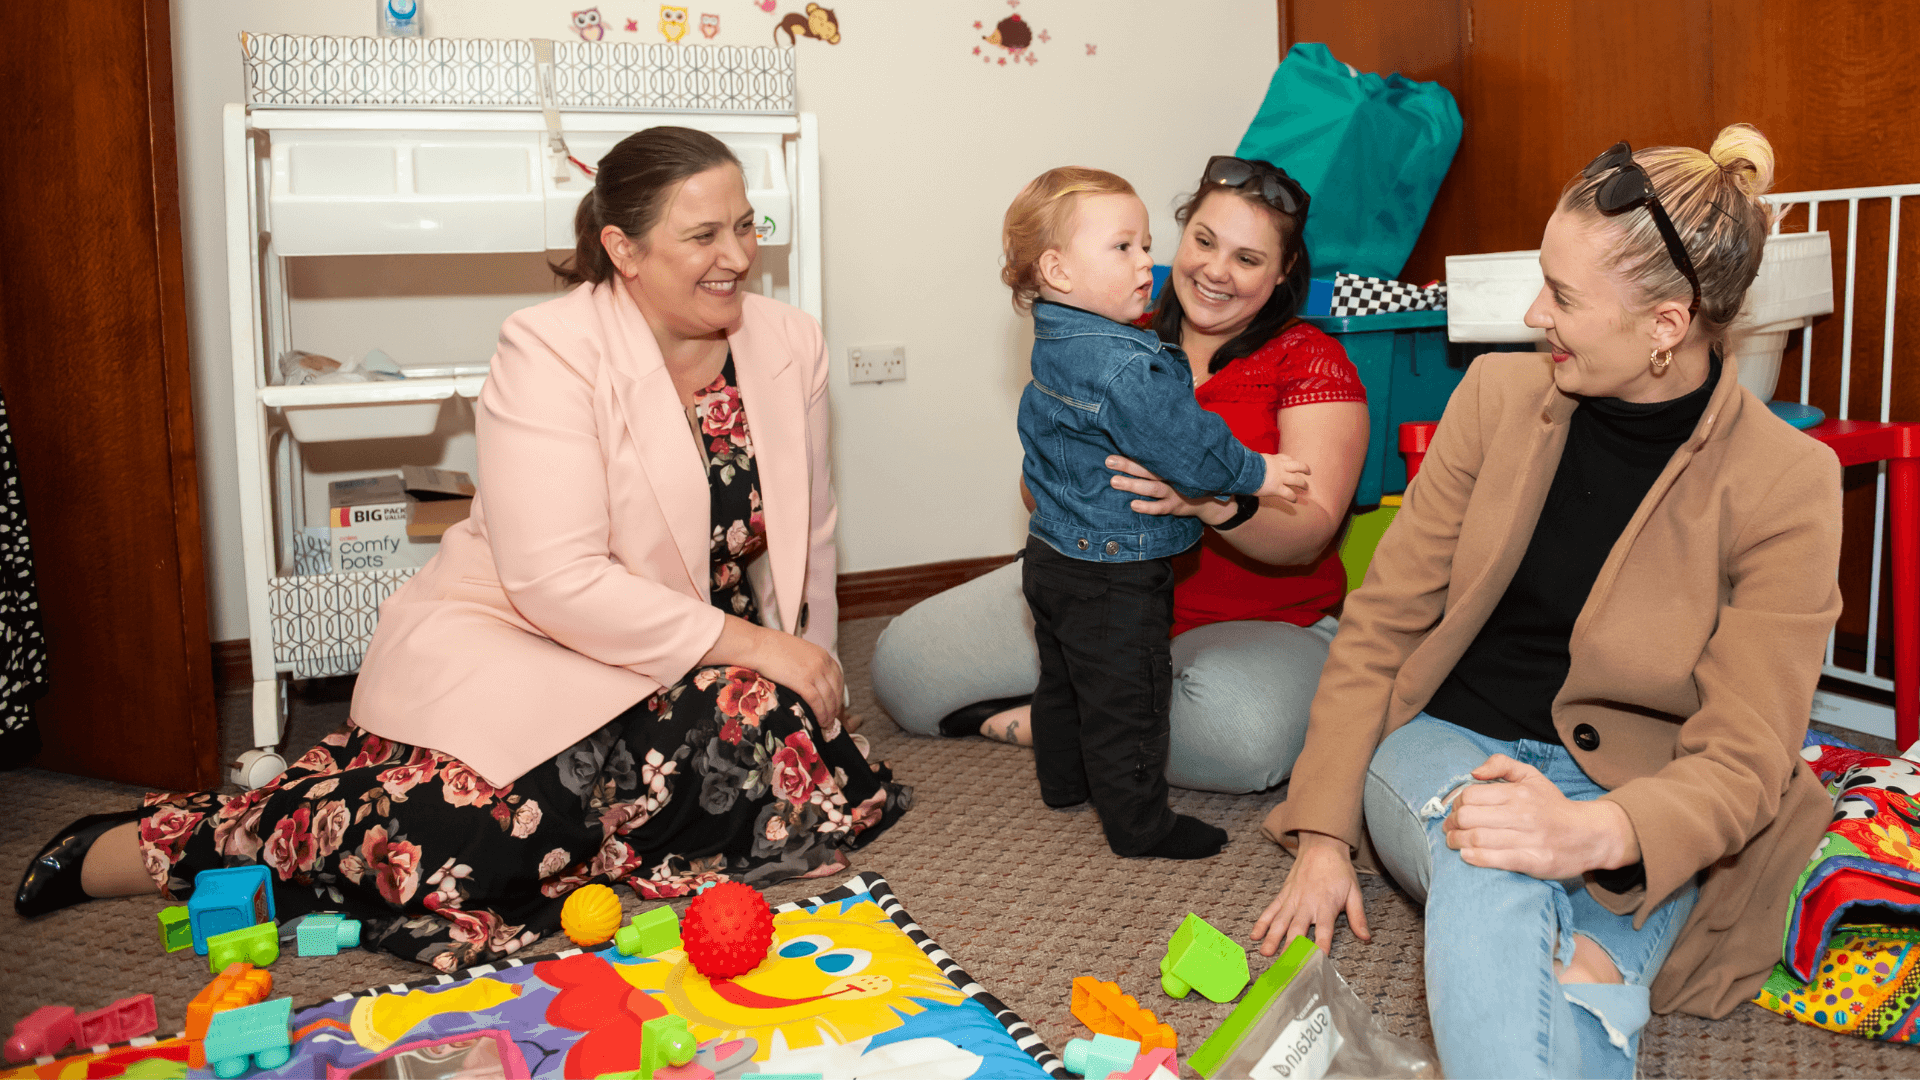 Melanie Gibbons MP meets with mothers from the HOPE Program